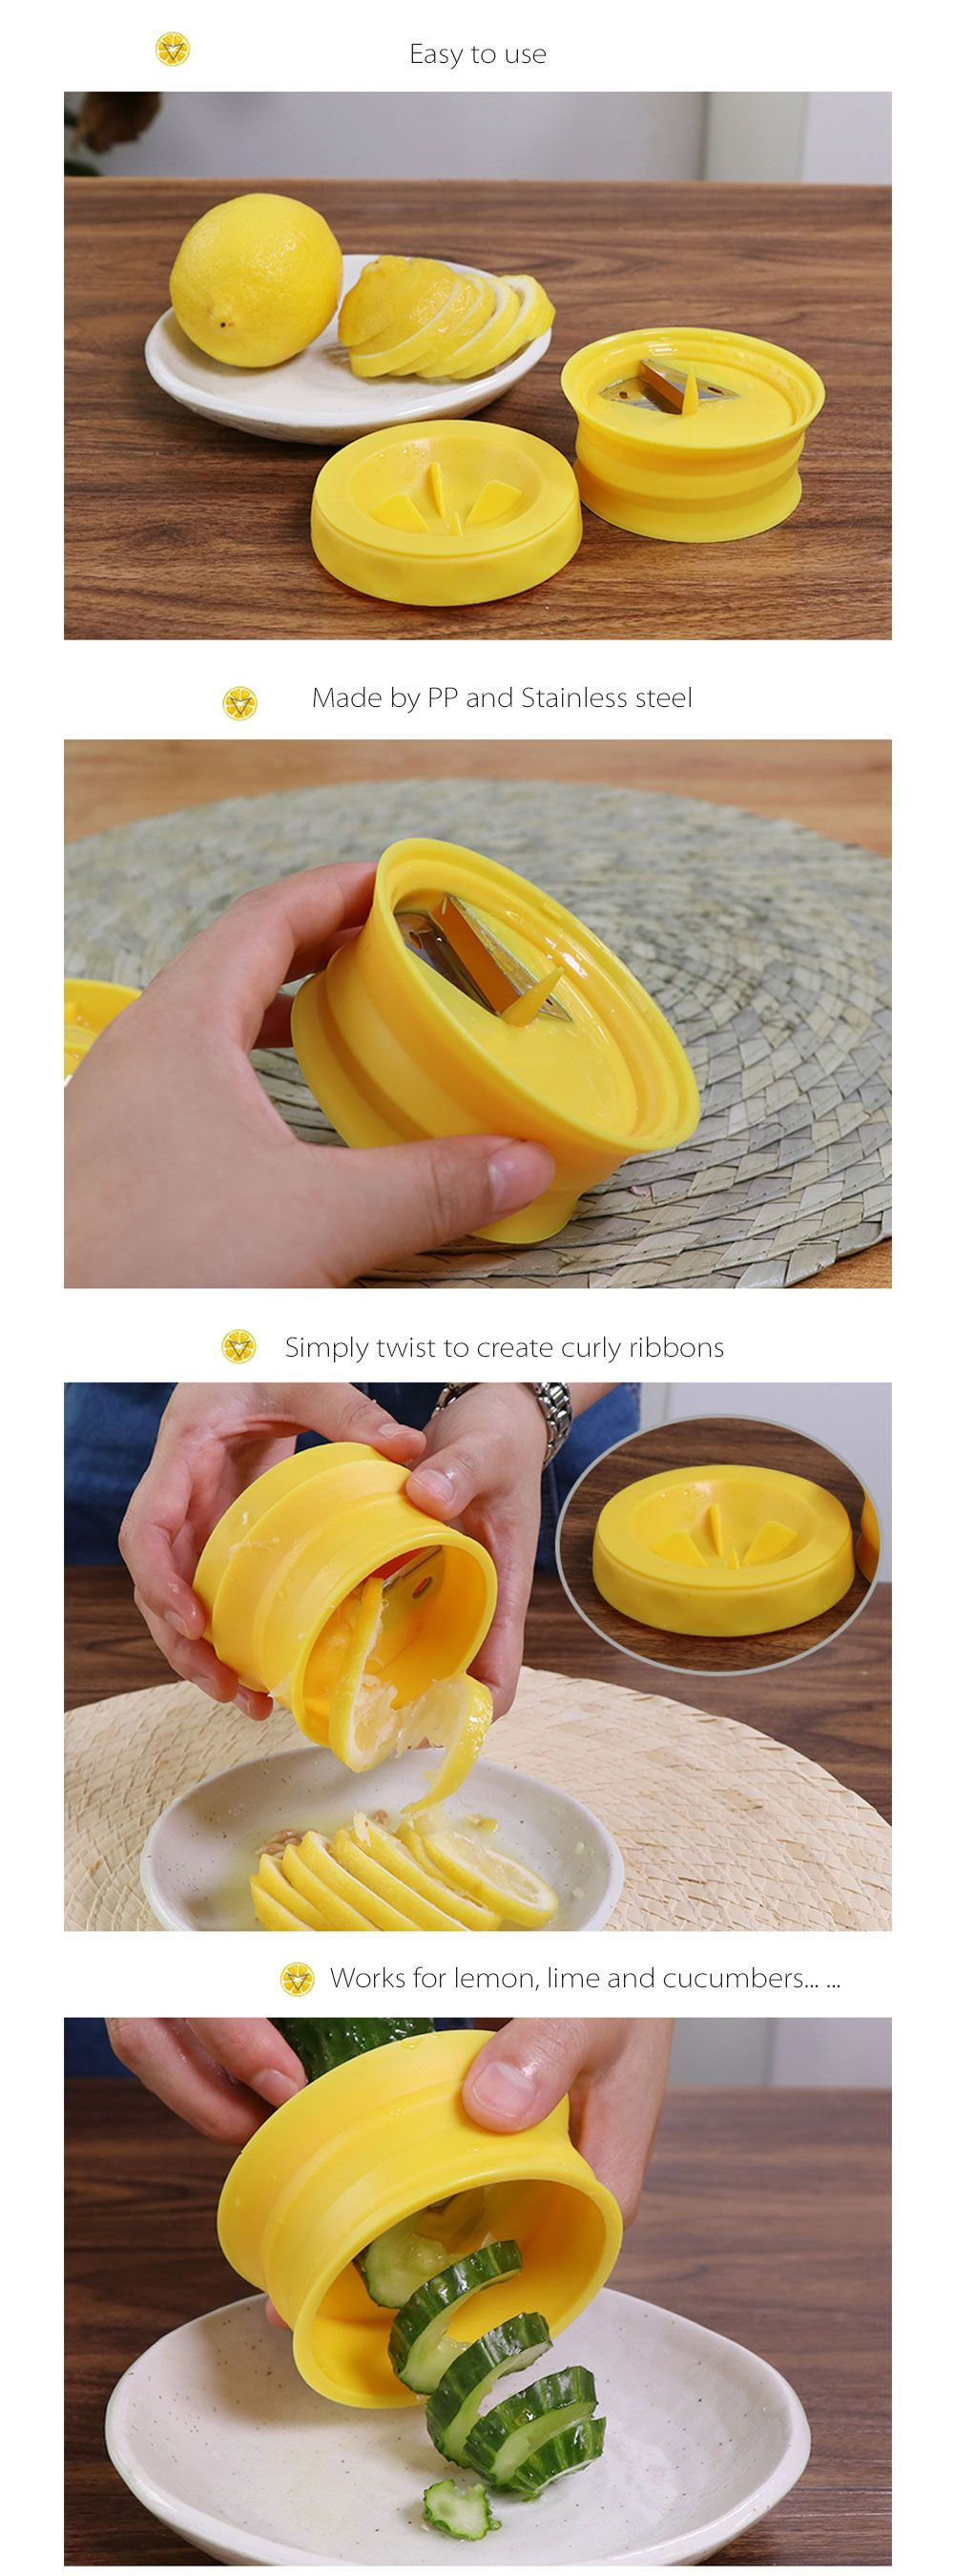 Lemon Slicer - ABS Material - Easy To Use from Apollo Box